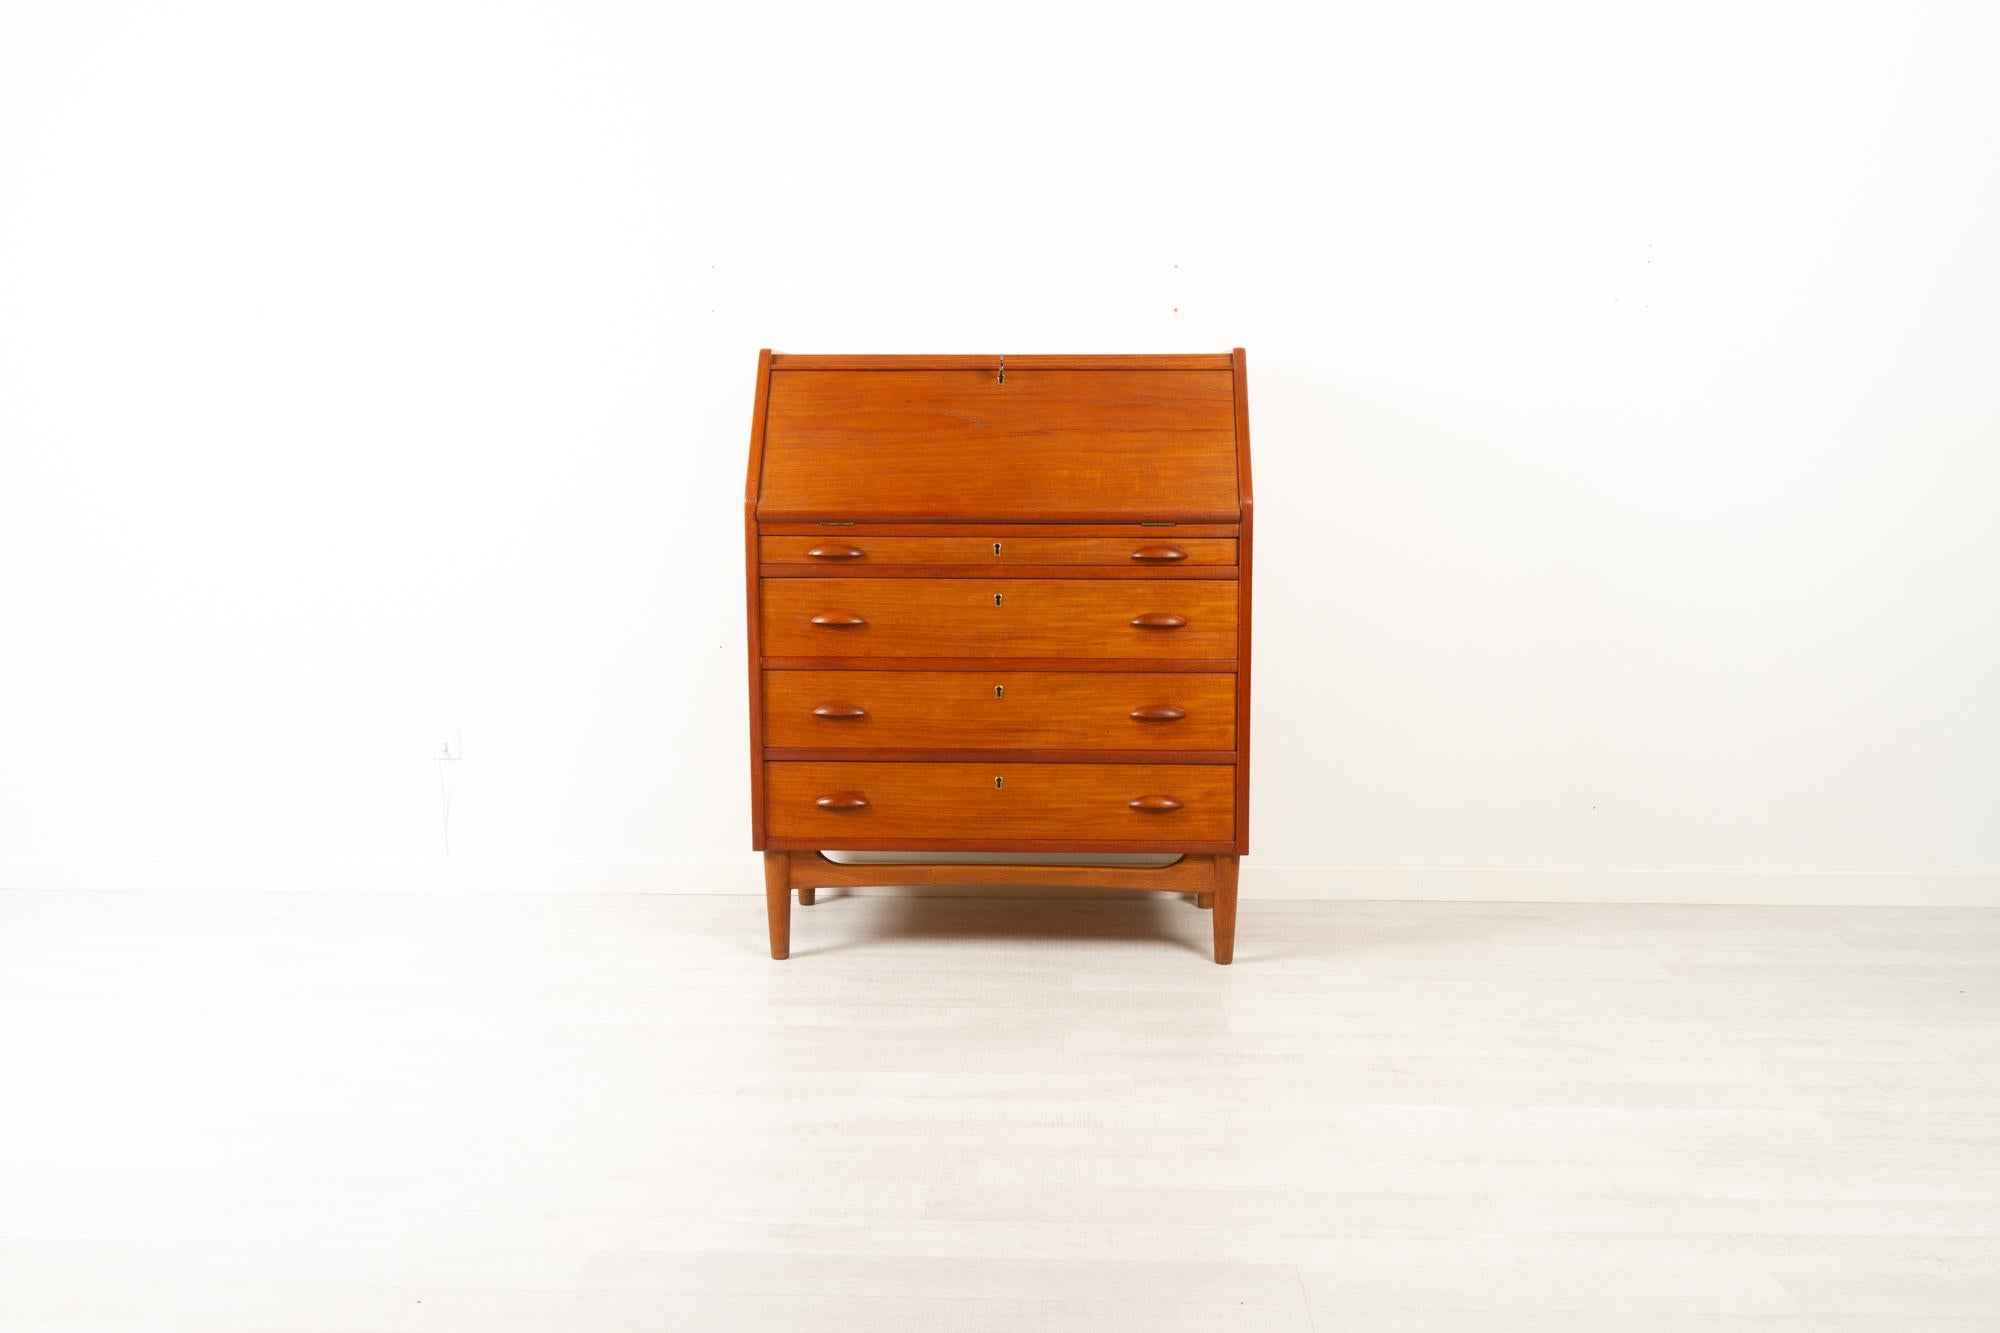 Danish modern teak secretaire, 1960s
Very versatile piece of Mid-Century Modern Danish design, elegant and suitable for many uses. 
This secretary has a lower section with four wide drawers, all with locks. The top section is fitted with a